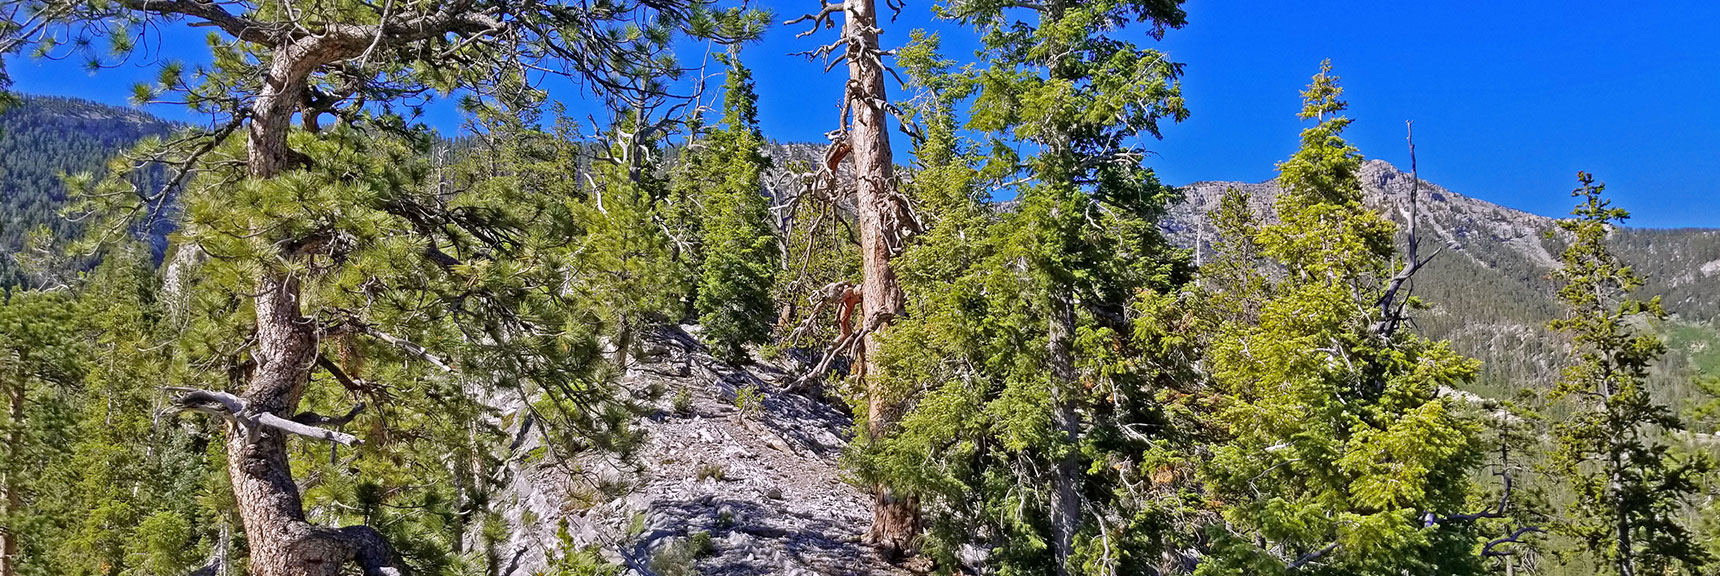 Arrival on Center of Ridge. Left (East) Side is Sheer Cliff | Lee to Kyle Canyon | Gradual Mid Ridge Approach | Mt. Charleston Wilderness | Spring Mountains, Nevada